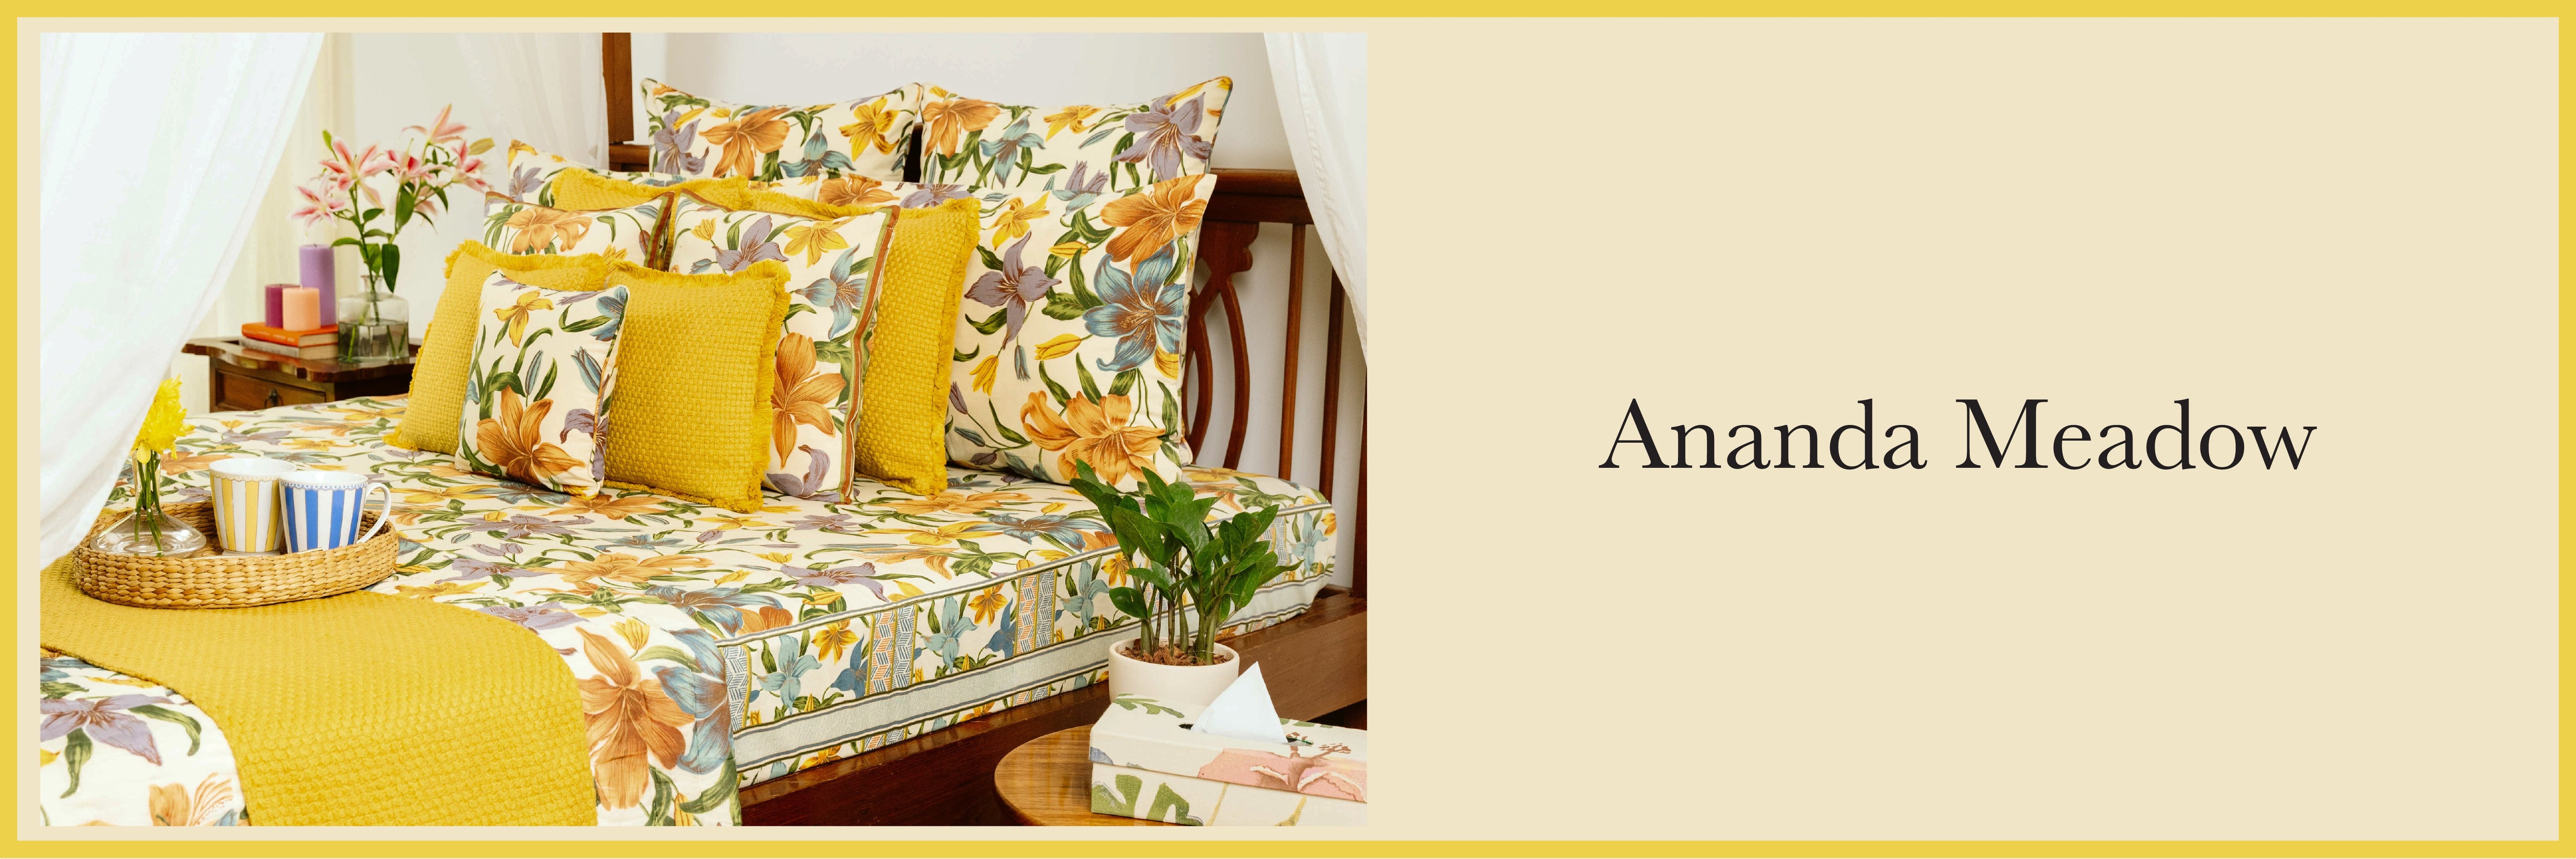 Ananda Meadow - Bedroom Collection